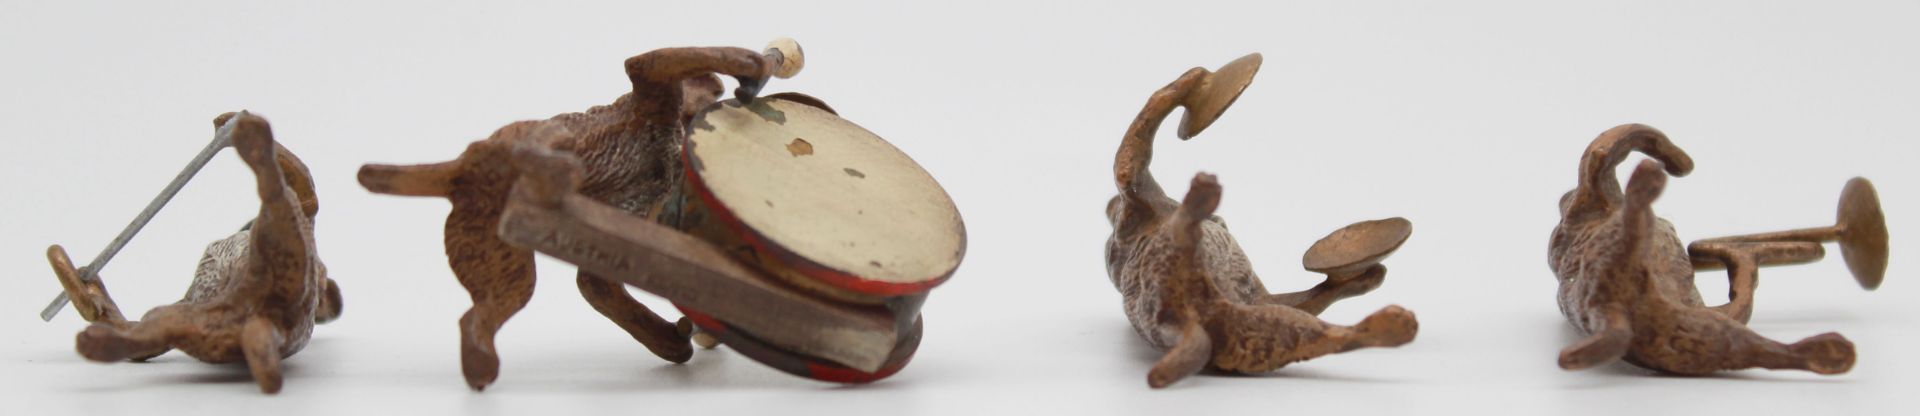 Dog band. 10 small bronzes. Cold painted. Vienna? Up to 4.5 cm high. - Image 13 of 22